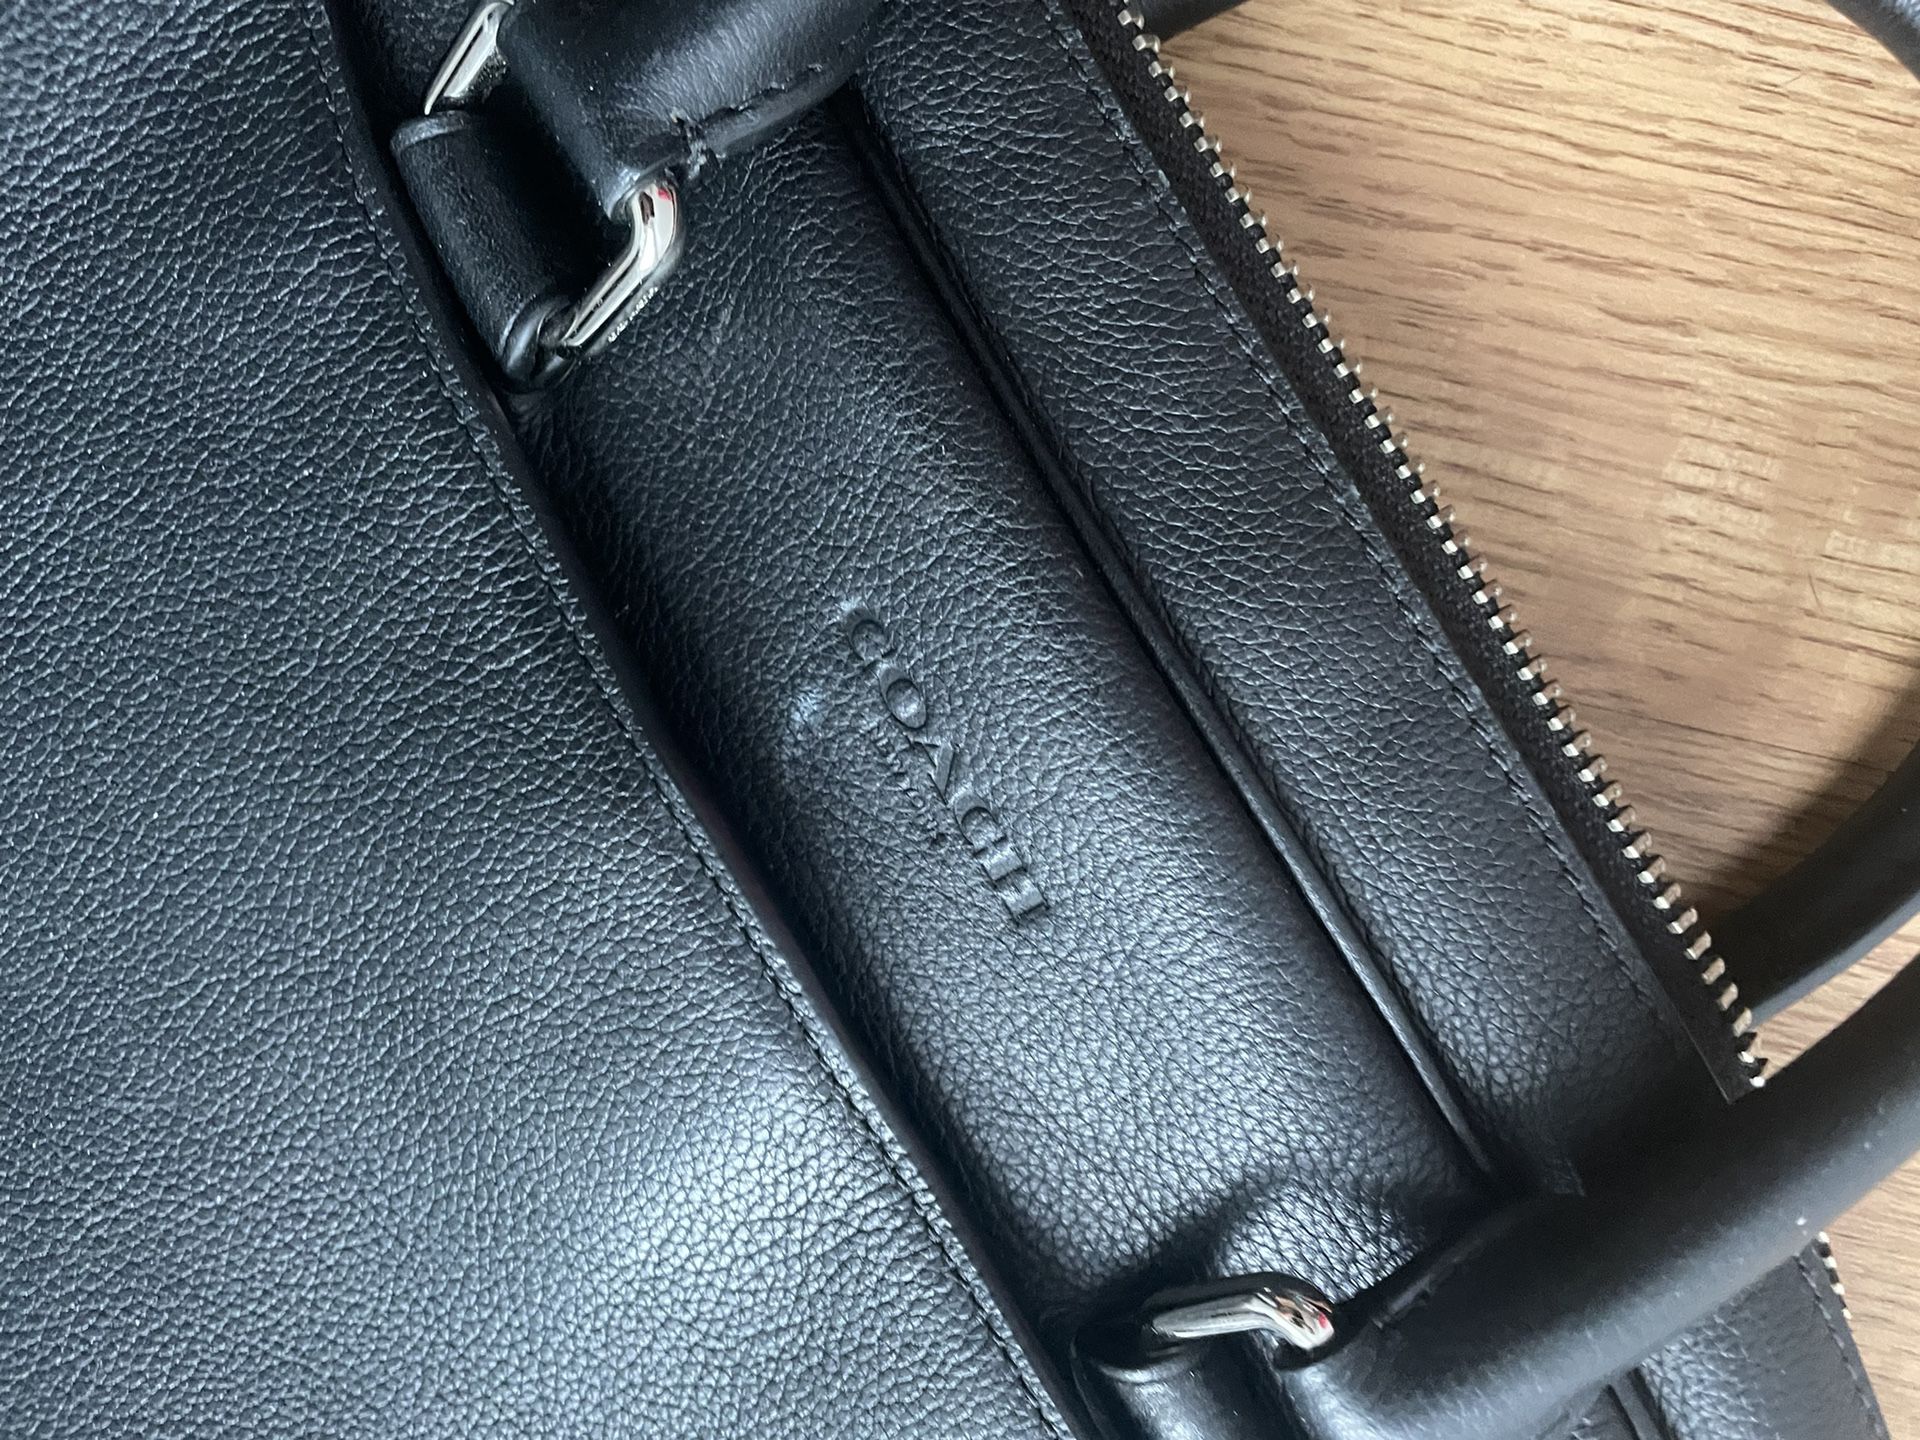 Coach Laptop Bag for Sale in Portland, OR - OfferUp